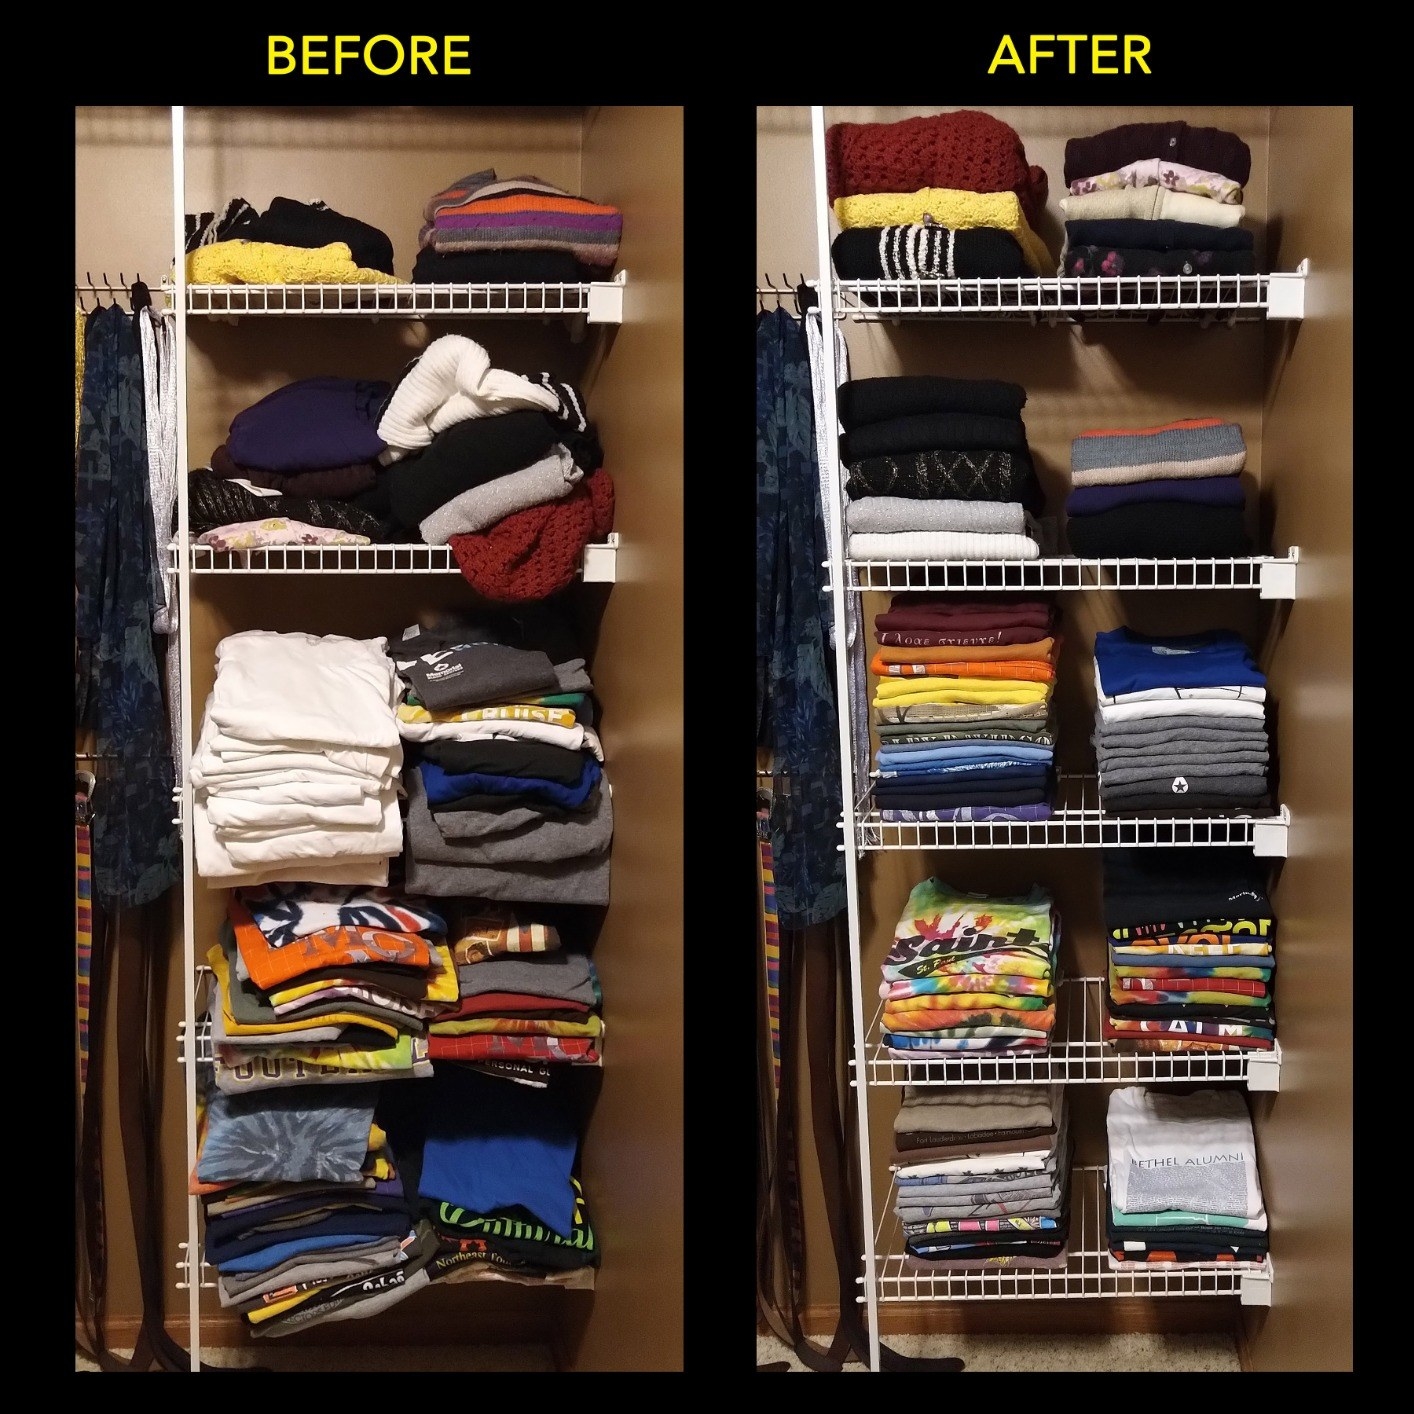 reviewer before and after images of closet shelves becoming more neatly organized with perfectly folded clothes